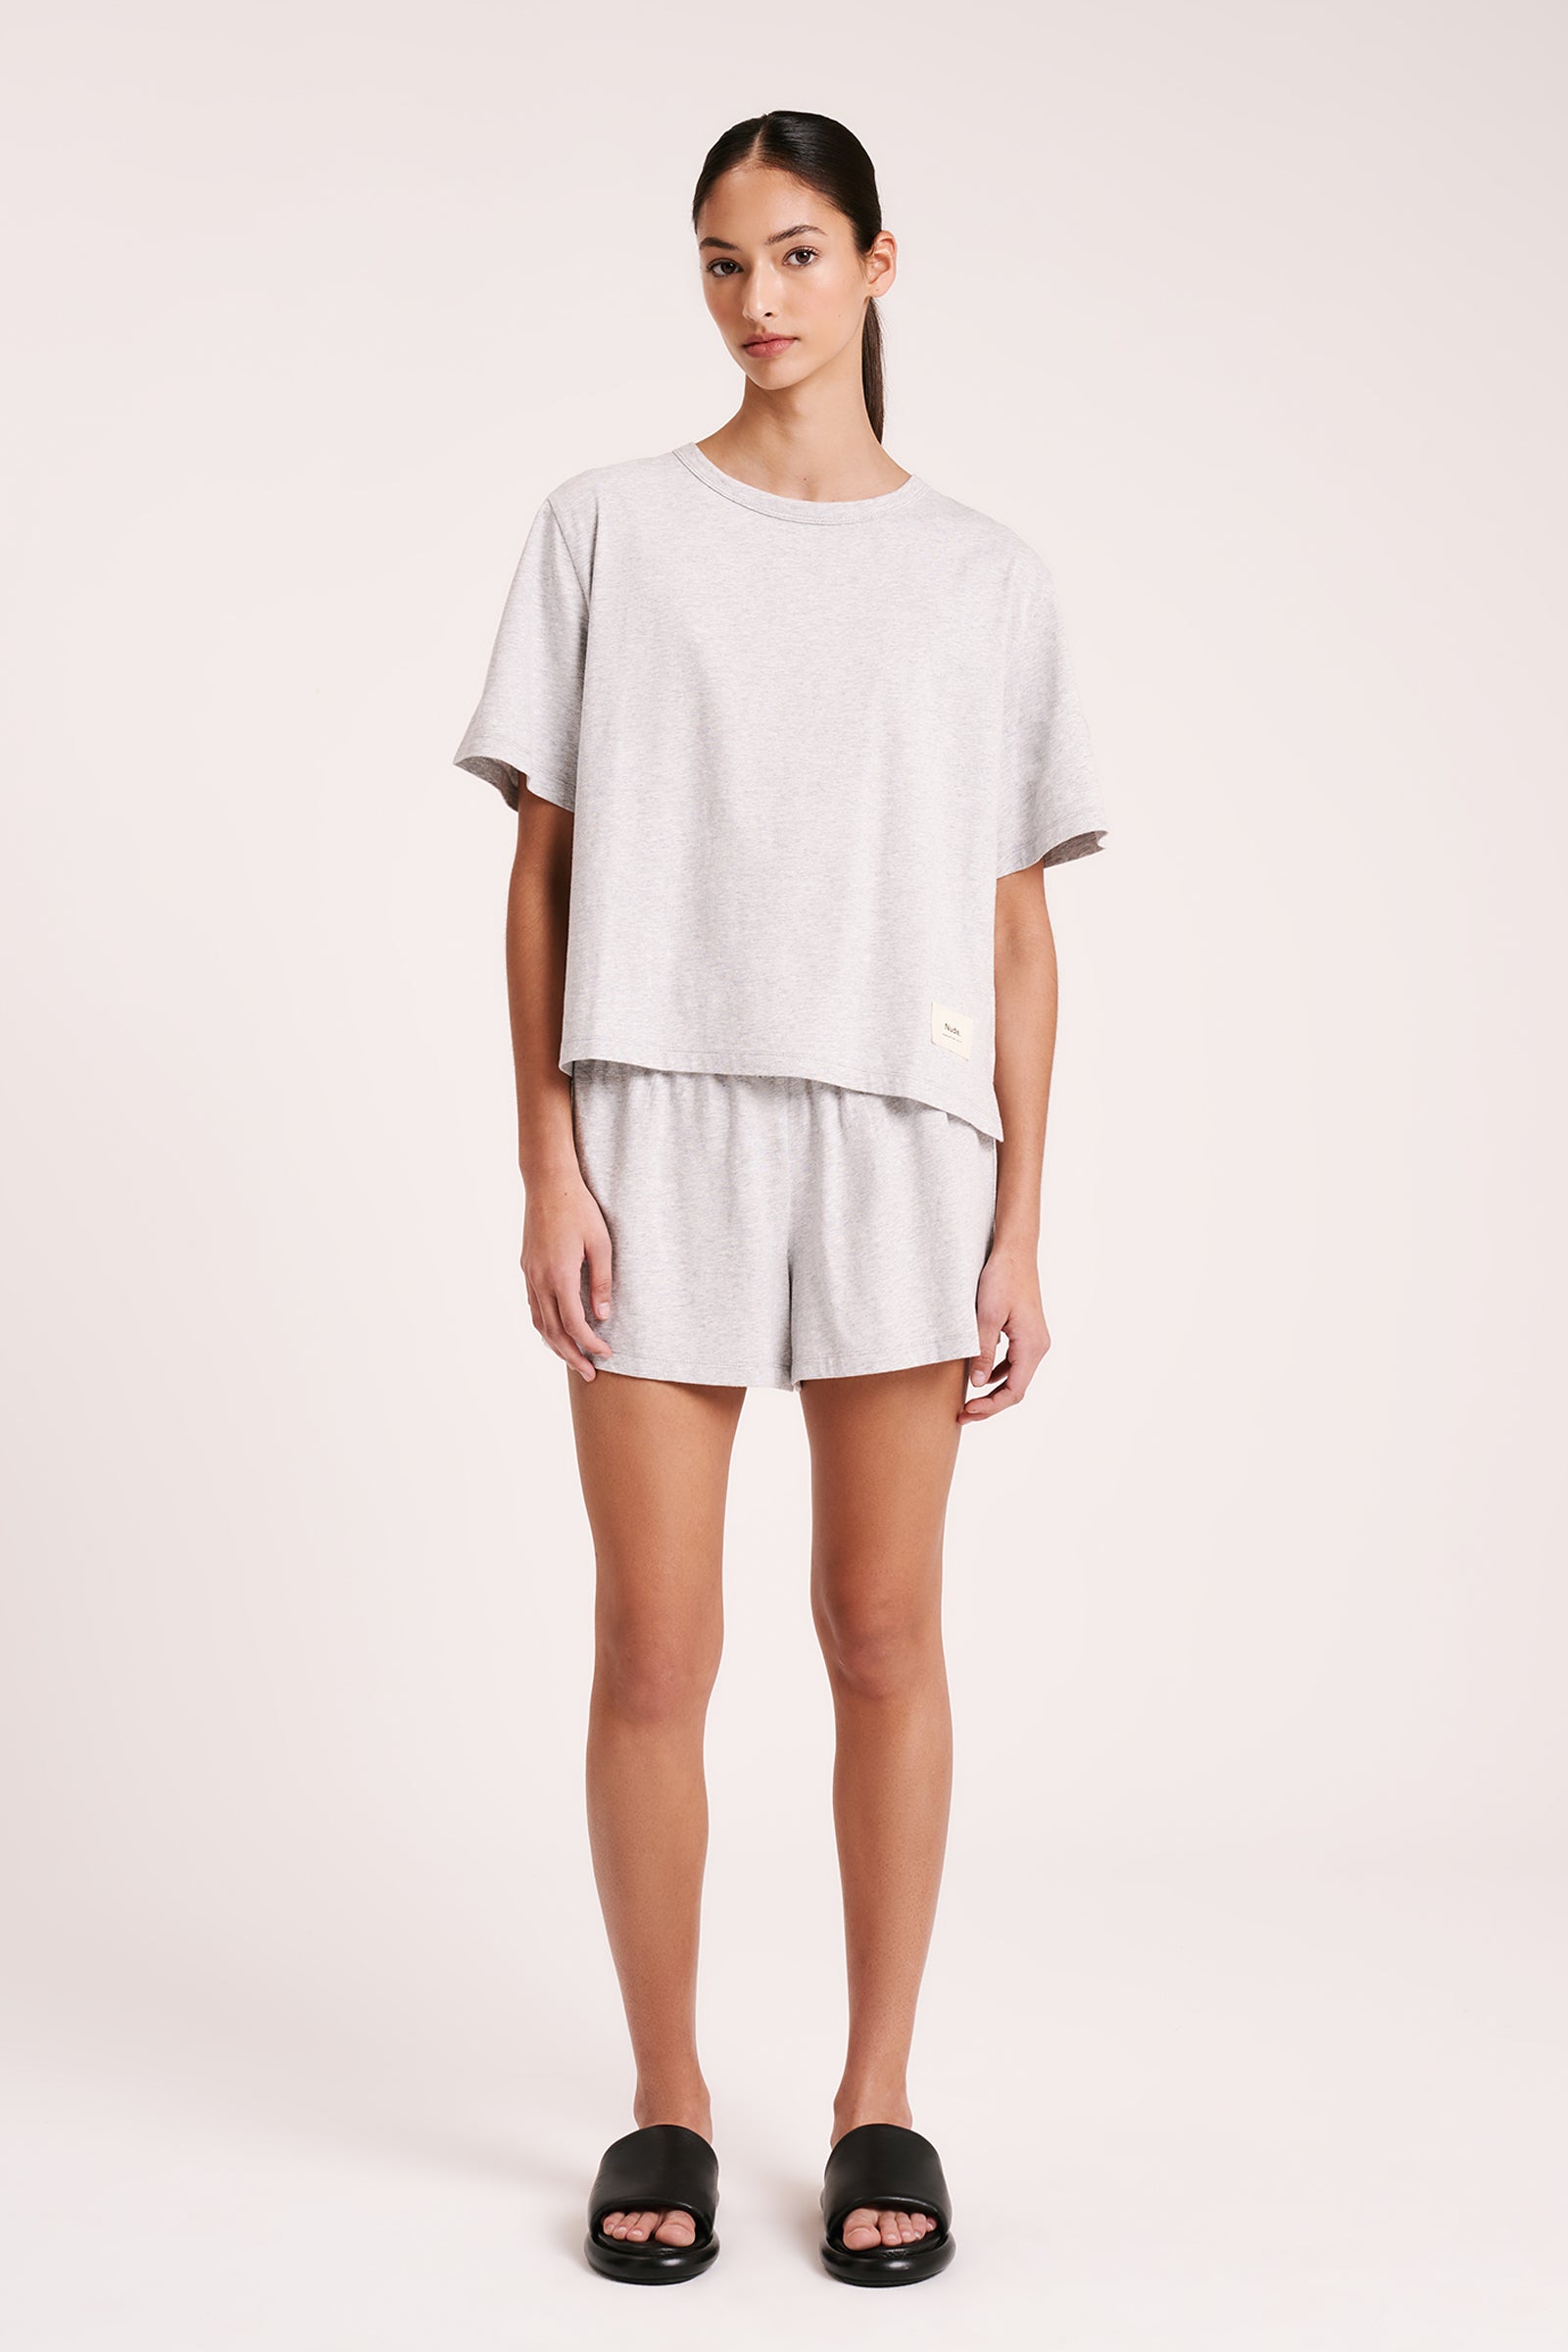 Nude Lucy | Lounge Jersey Tee - Grey Marle